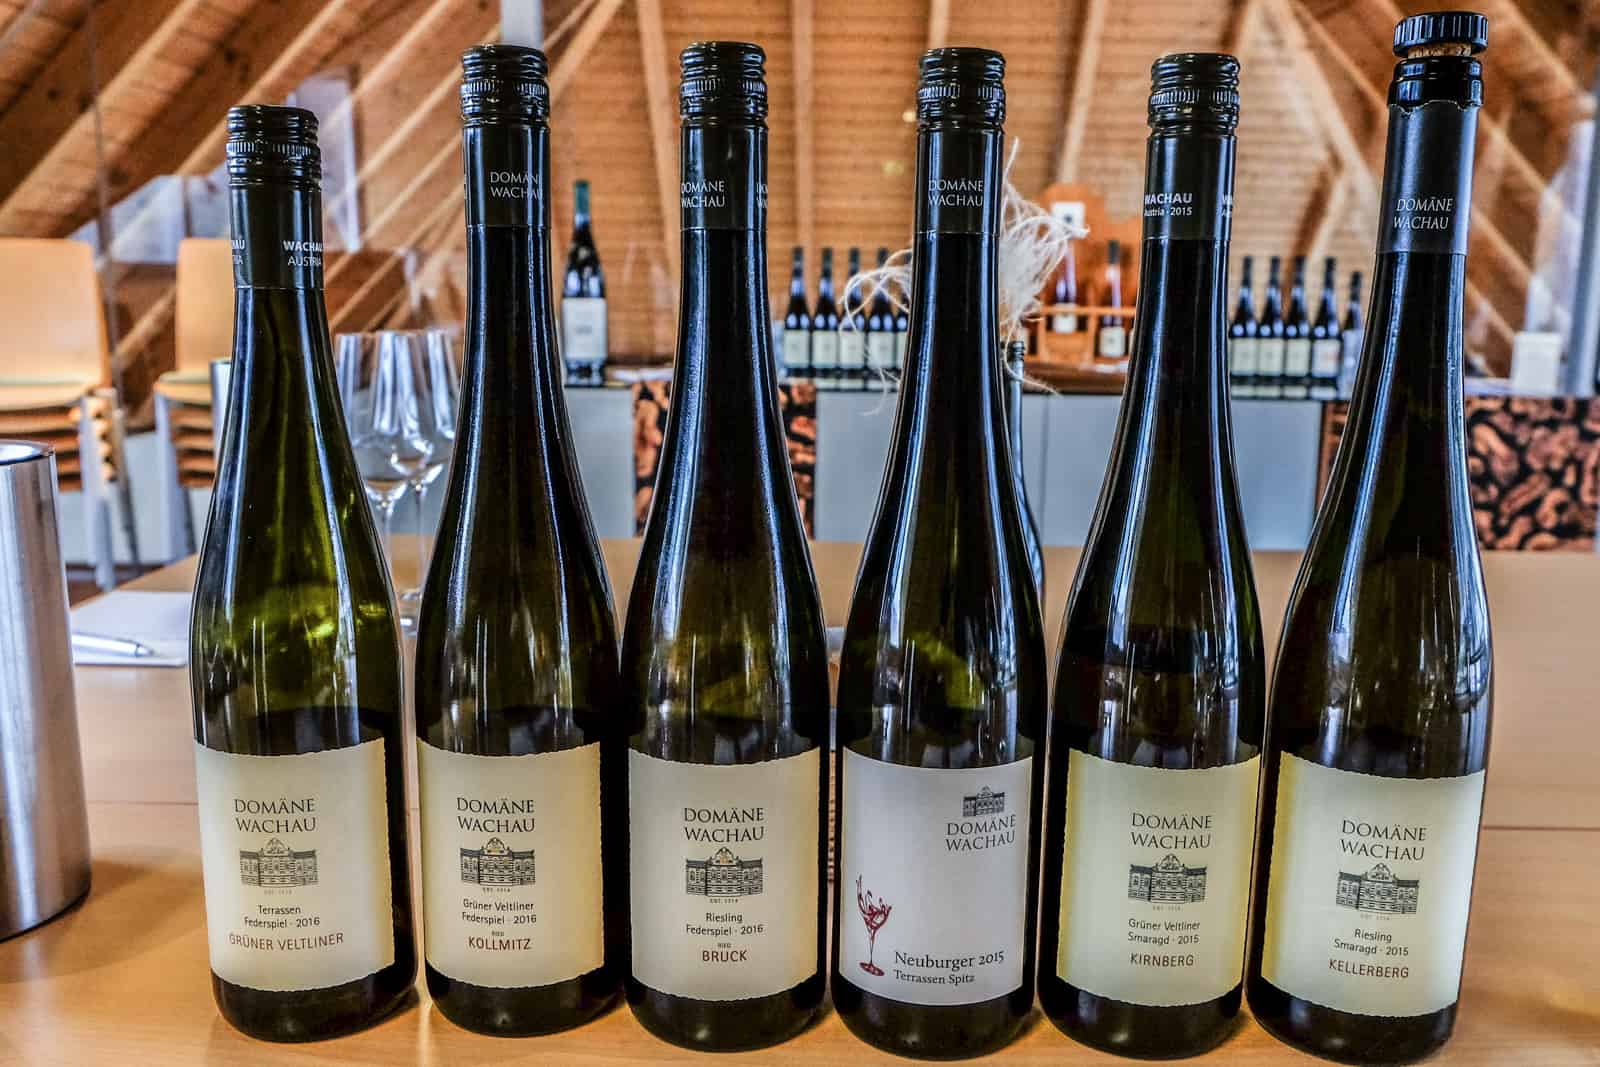 A row of six bottles of at the Domäne Wachau wine during a wine tasting session